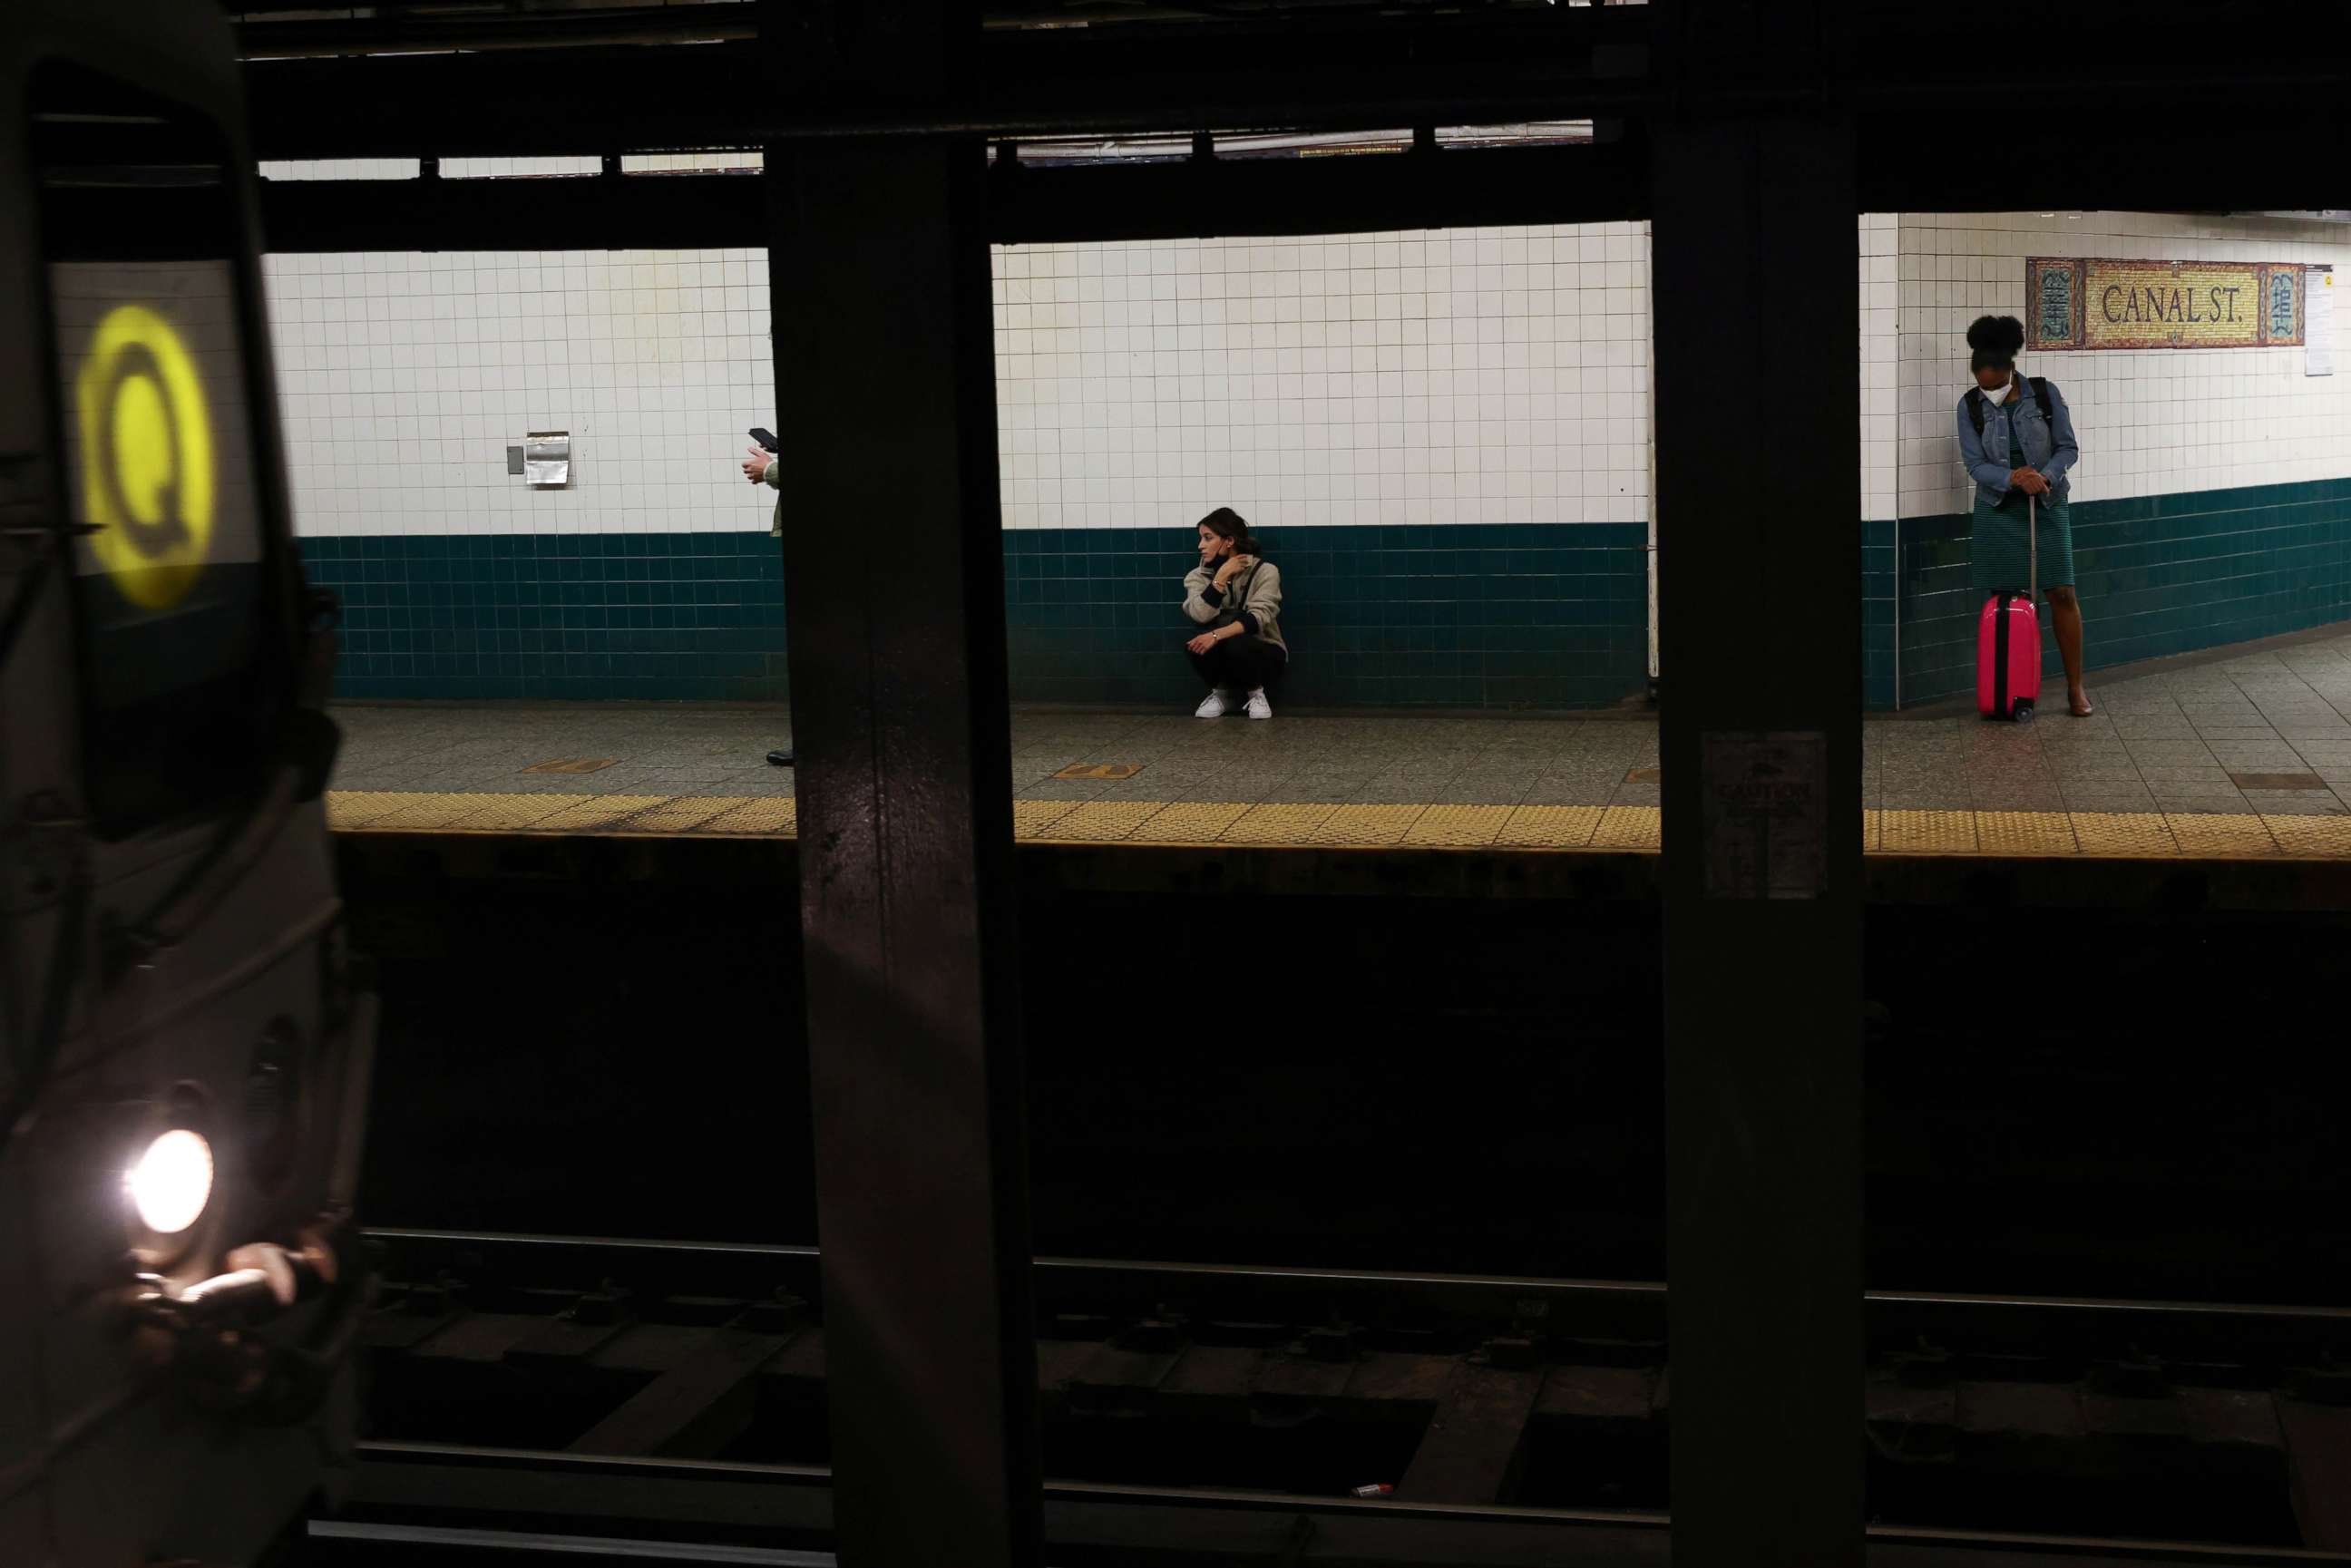 PHOTO: Subway riders wait for a train at the Canal Street station in the Chinatown section of Manhattan in New York, Oct. 12, 2021.